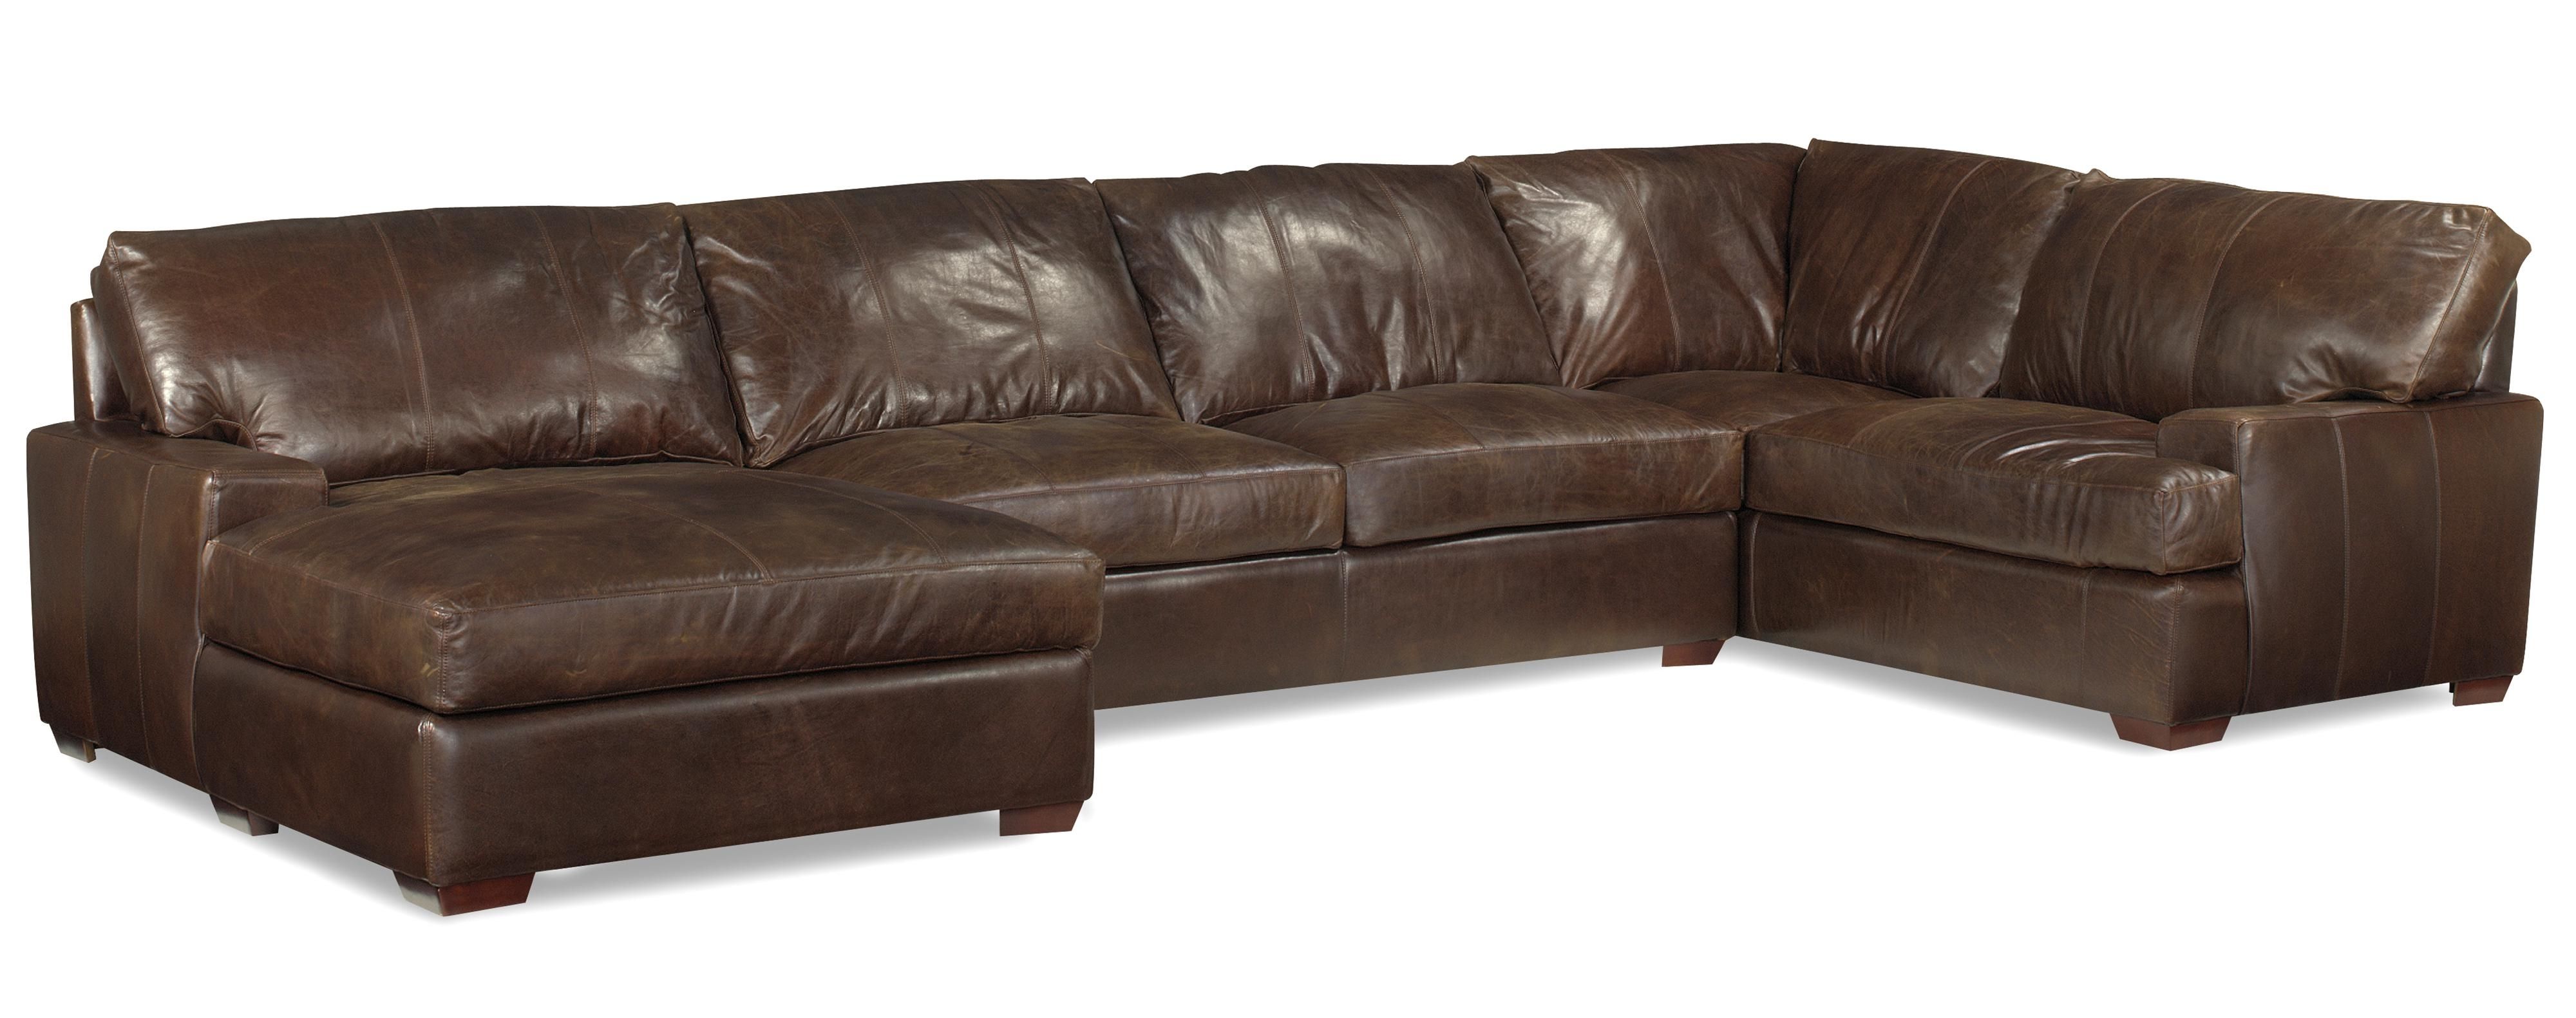 leather chaise sectional sofa